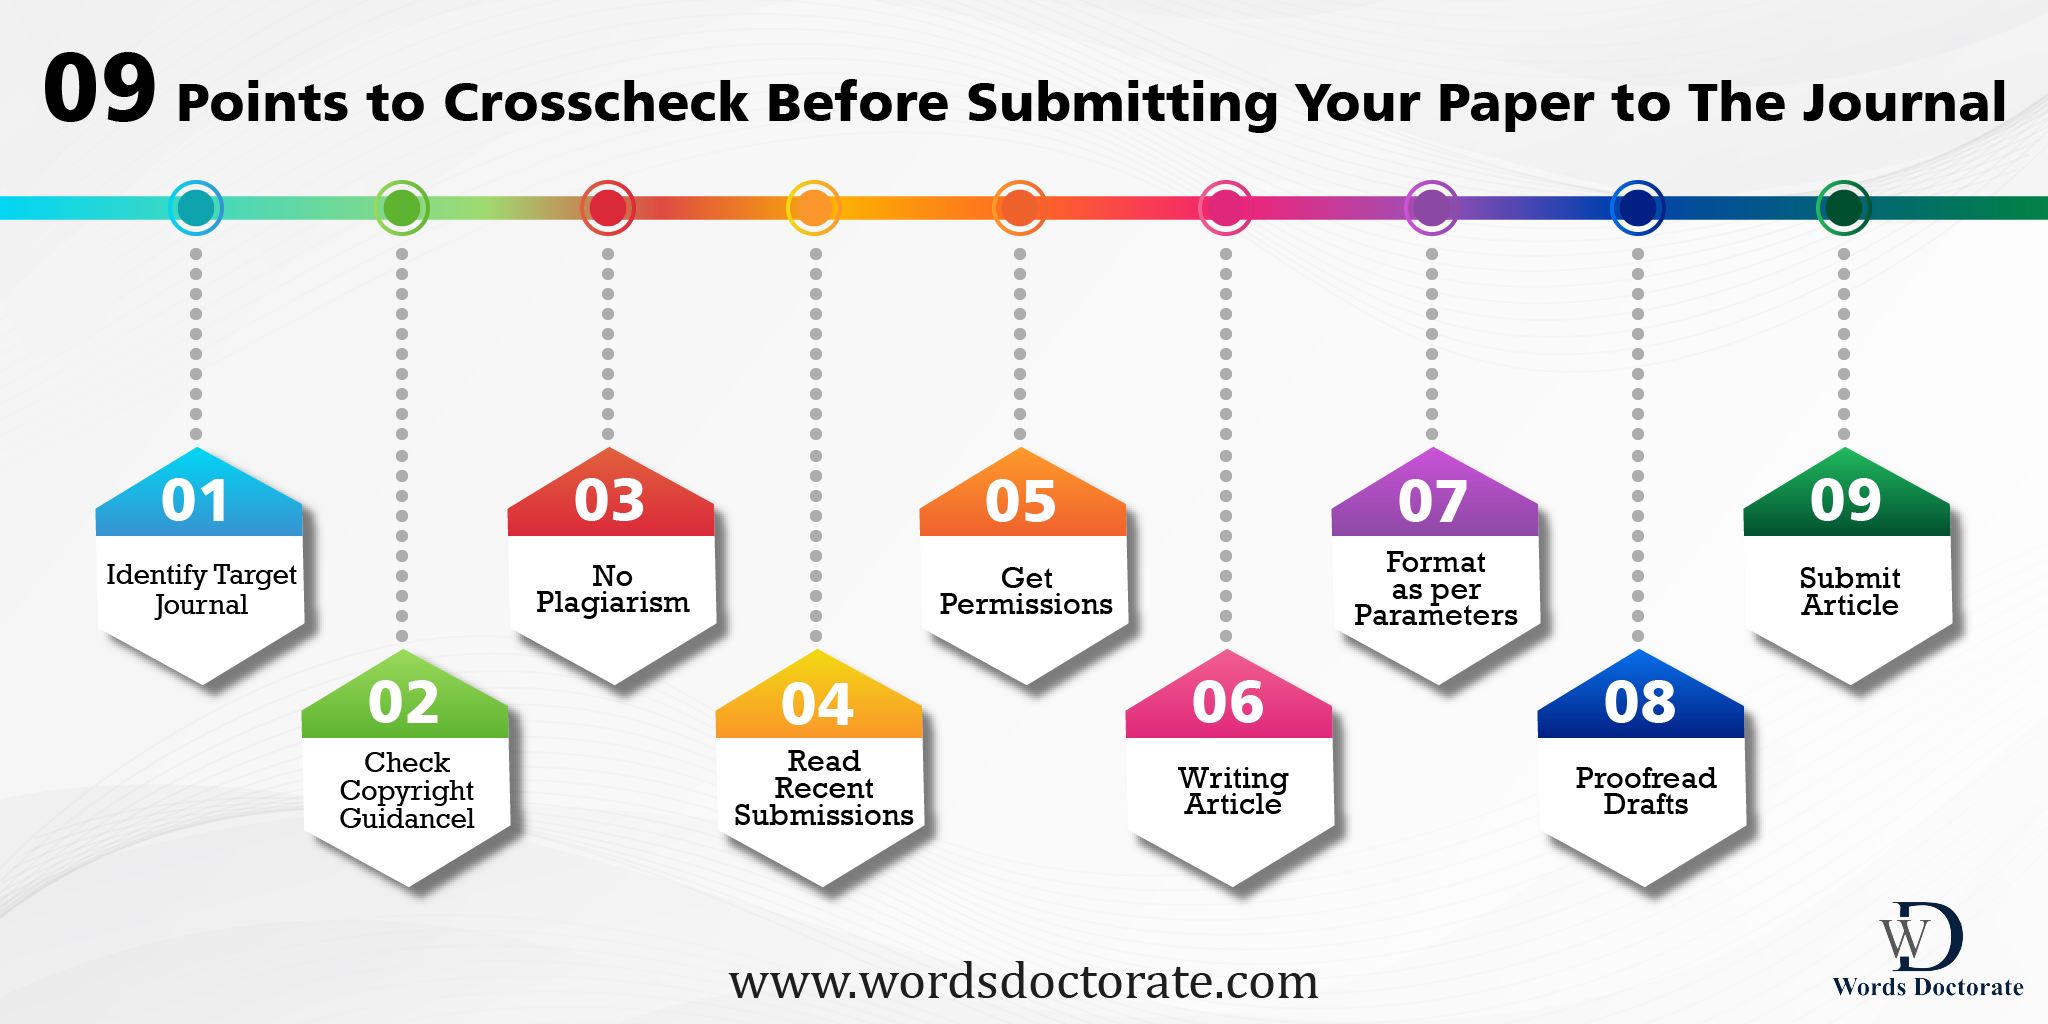 09 Points To Crosscheck Before Submitting Your Paper to The Journal